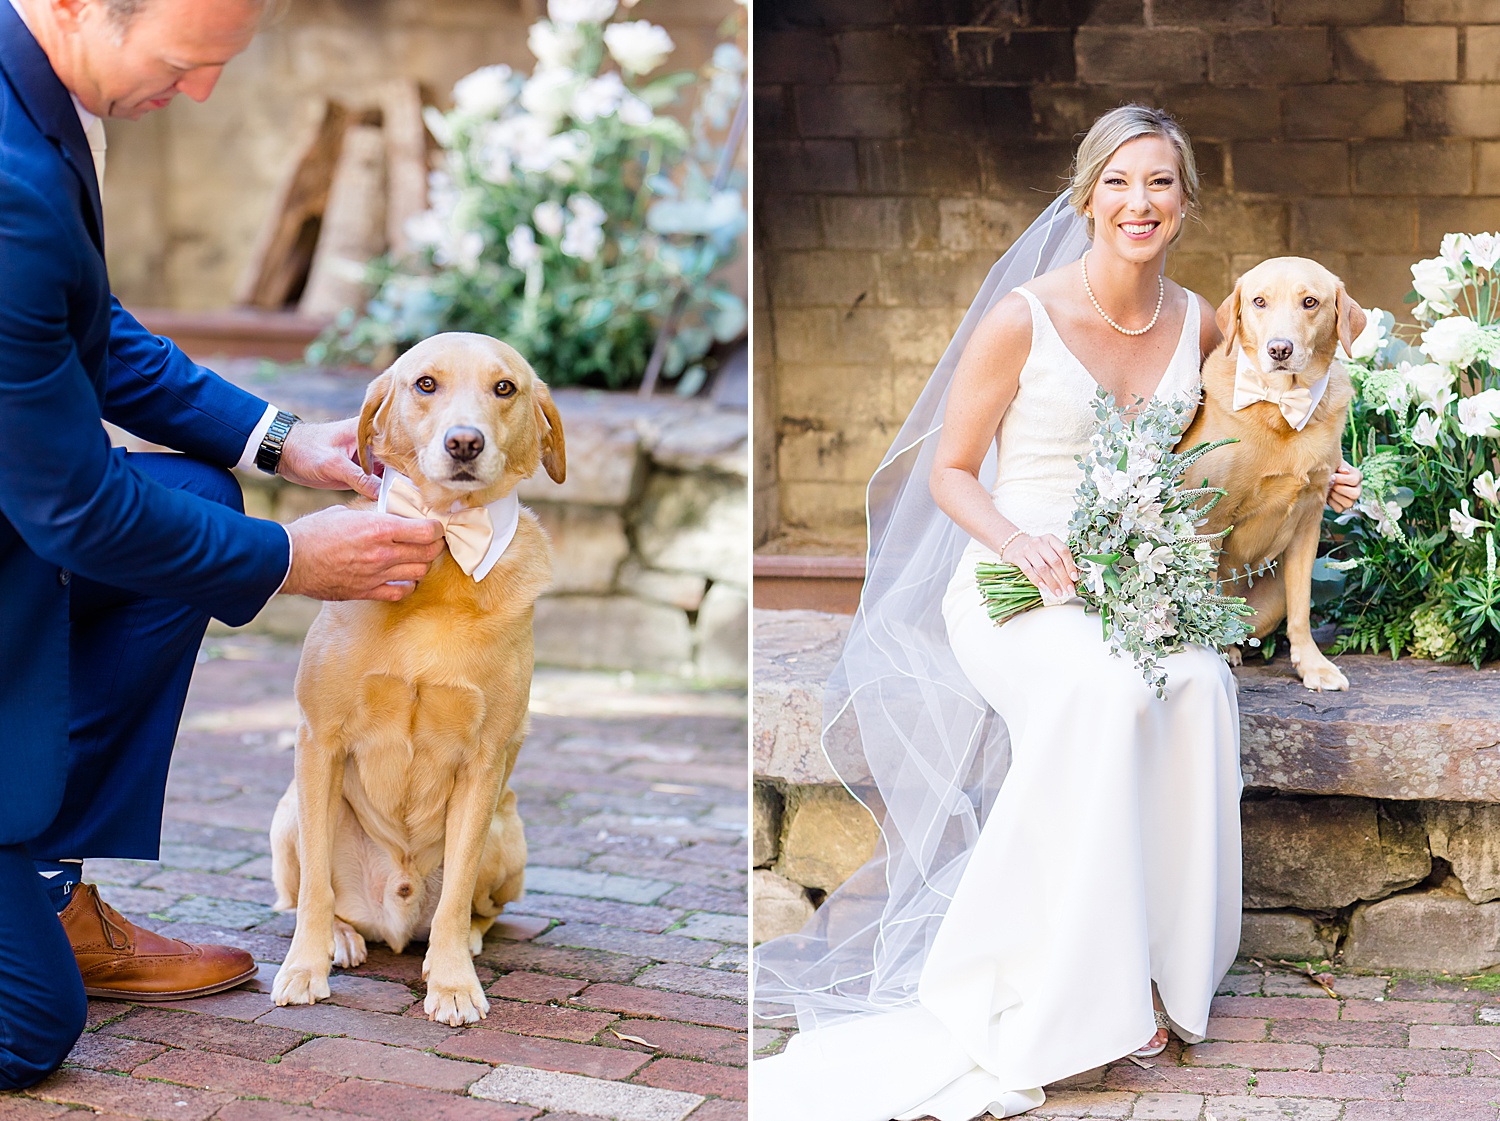 newlyweds with their dog after wedding ceremony